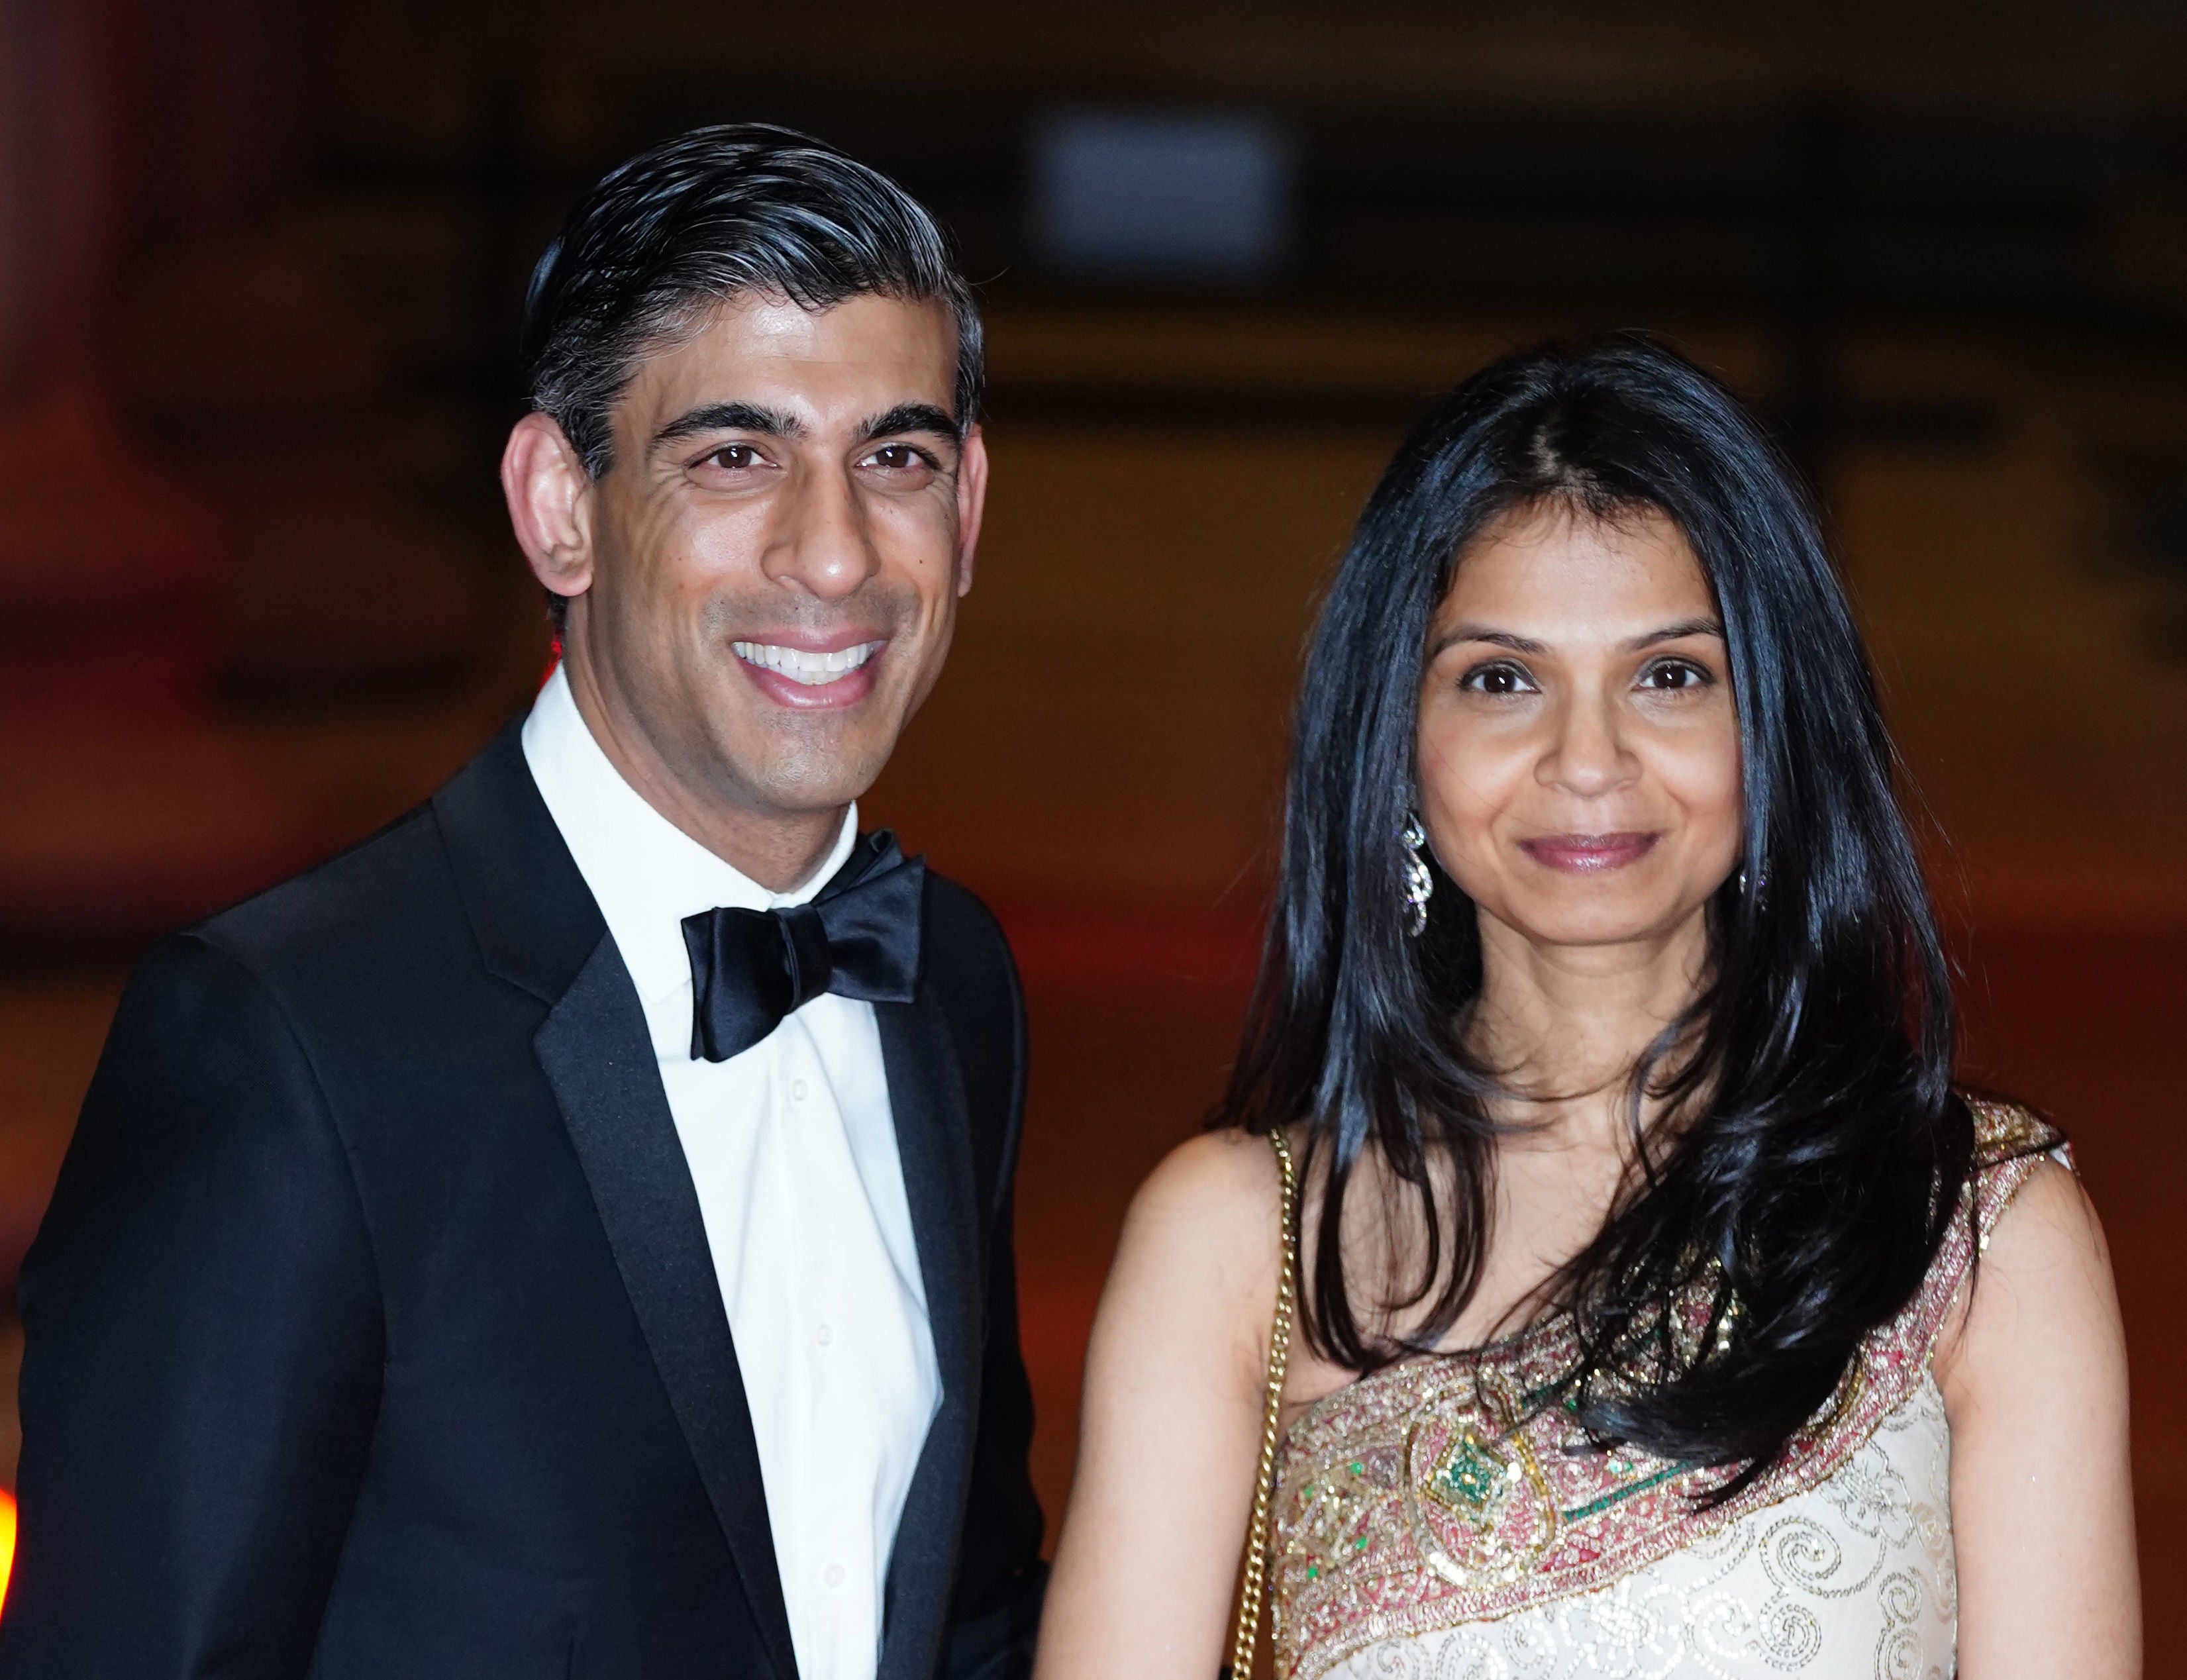 Anonymous ministers have been quoted saying that the only way for Rishi Sunak to deal with the furore over his financial interests would be for him and his wife Akshata Murty to publish their tax returns